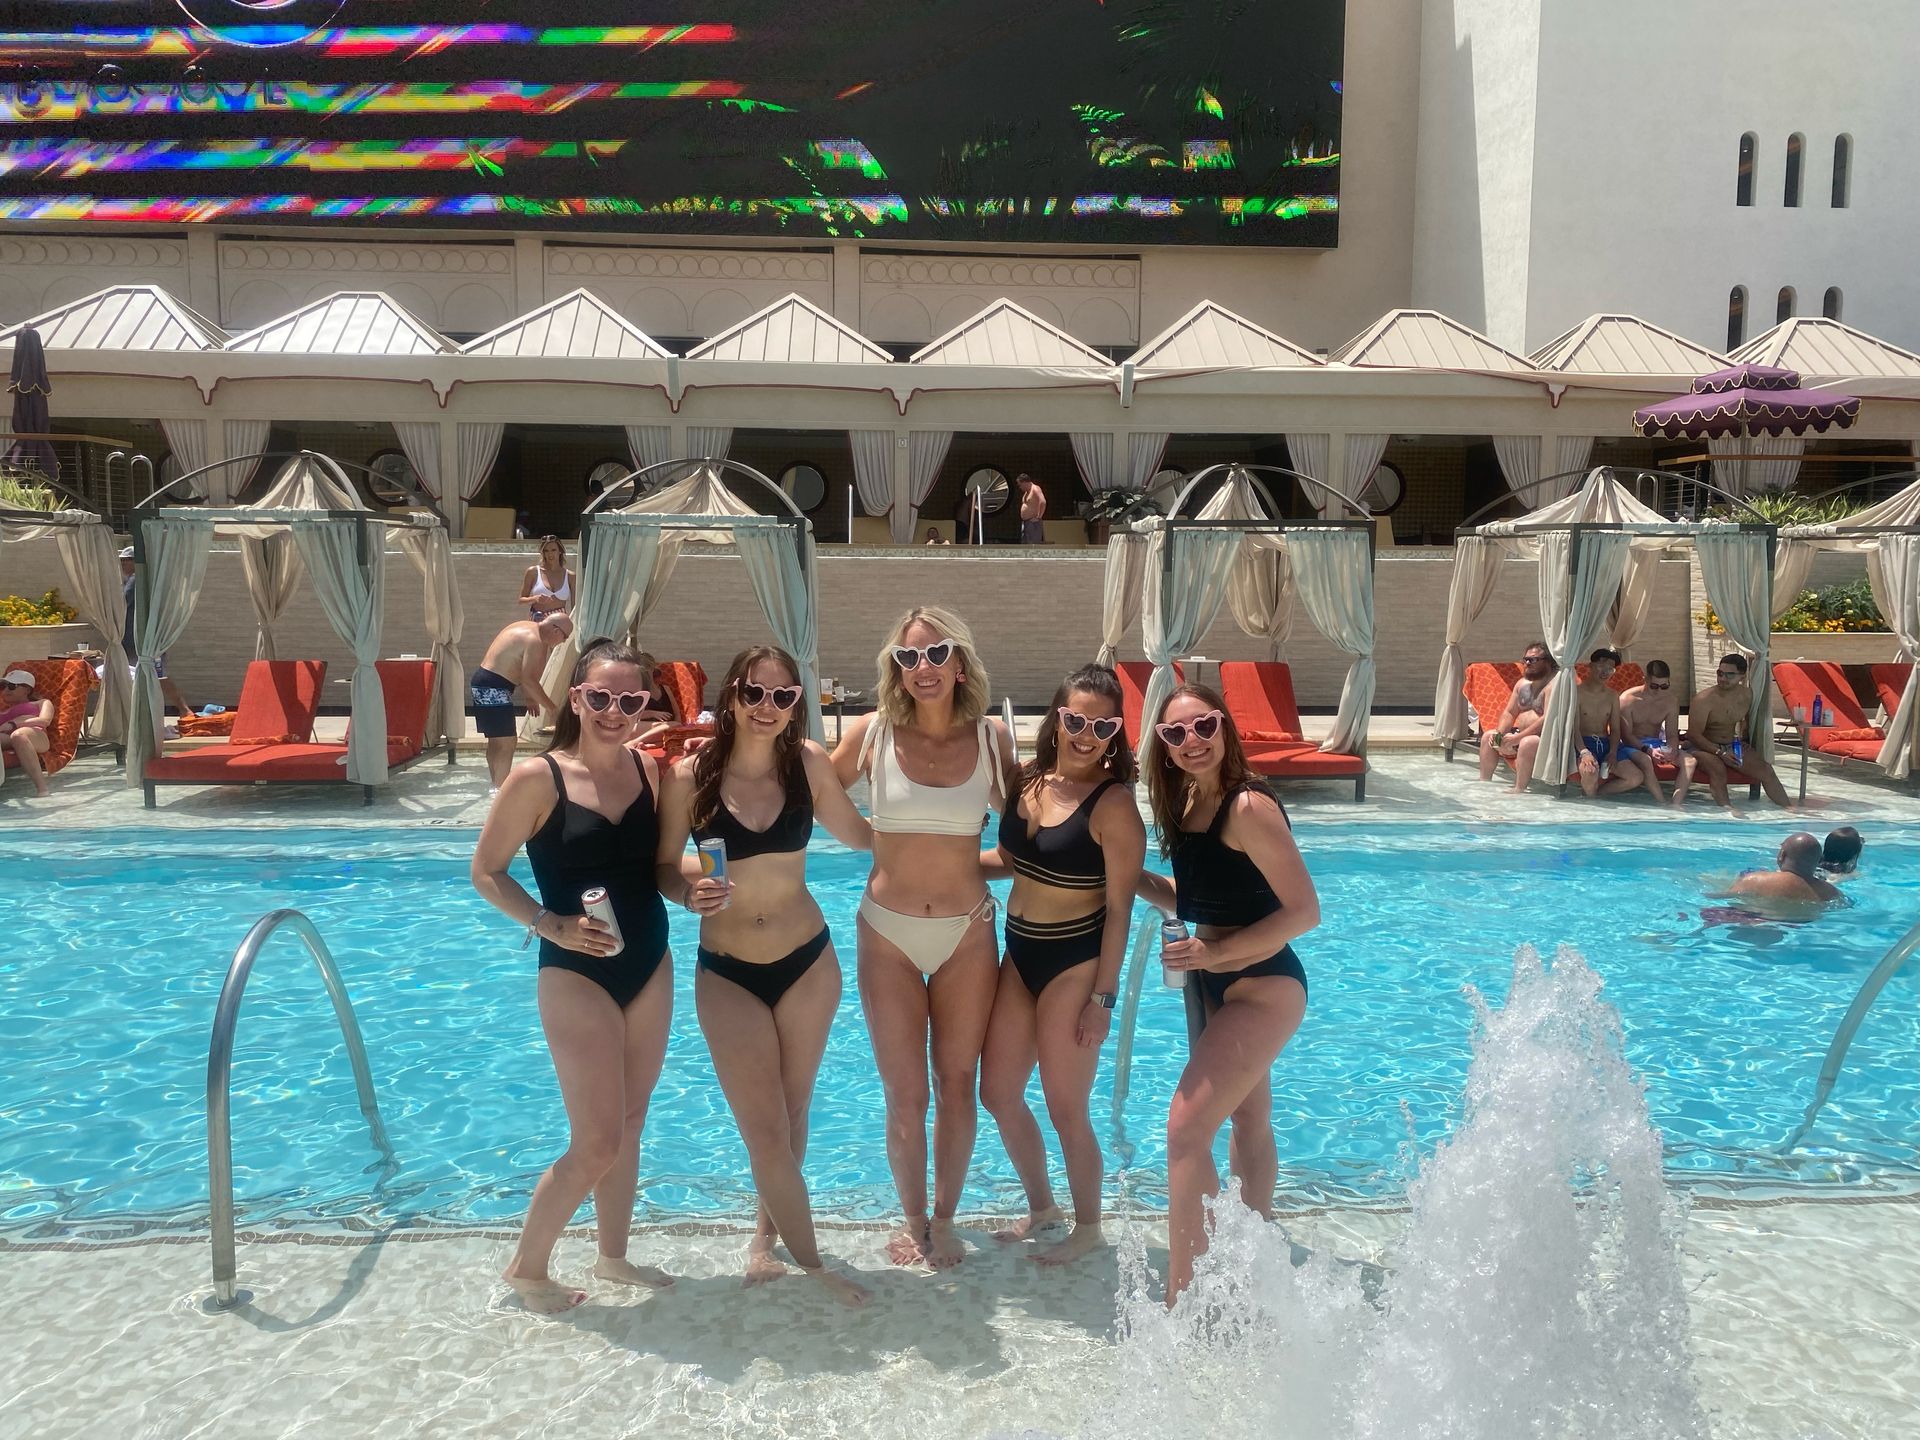 Las Vegas: Pool Crawl with Free Drinks on the Party Bus